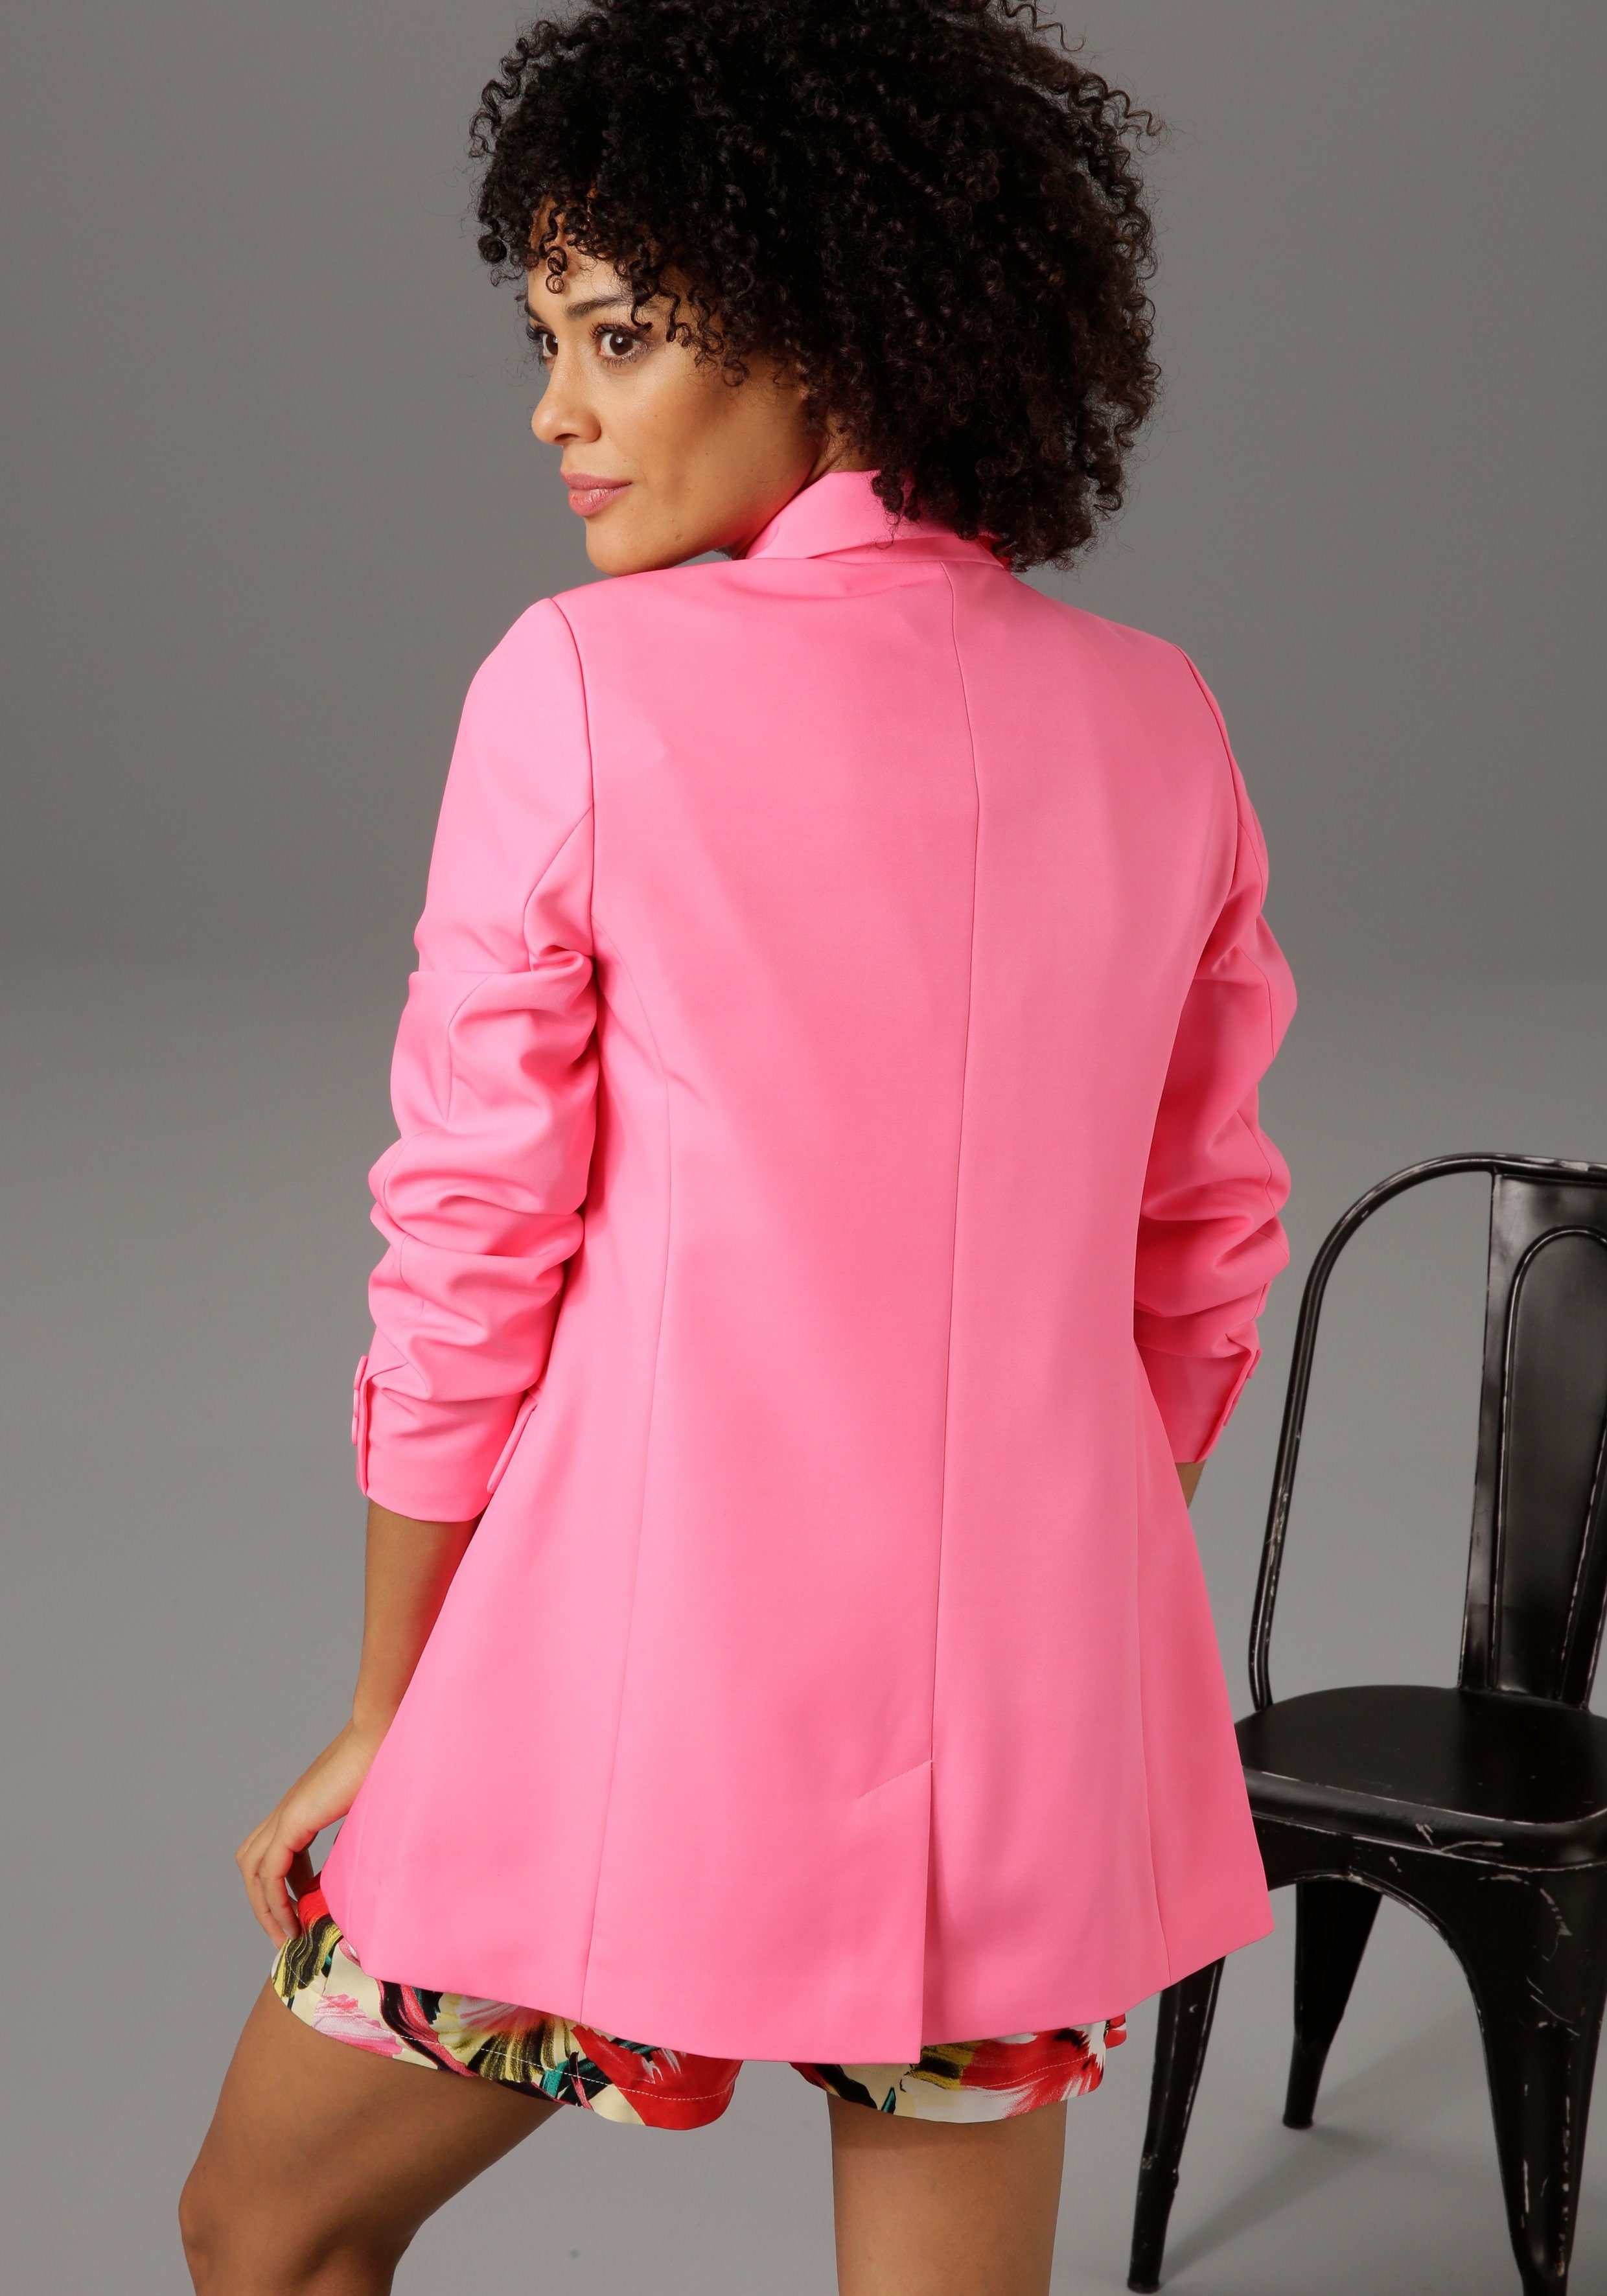 CASUAL angesagter Longblazer in pink Aniston Farbpalette